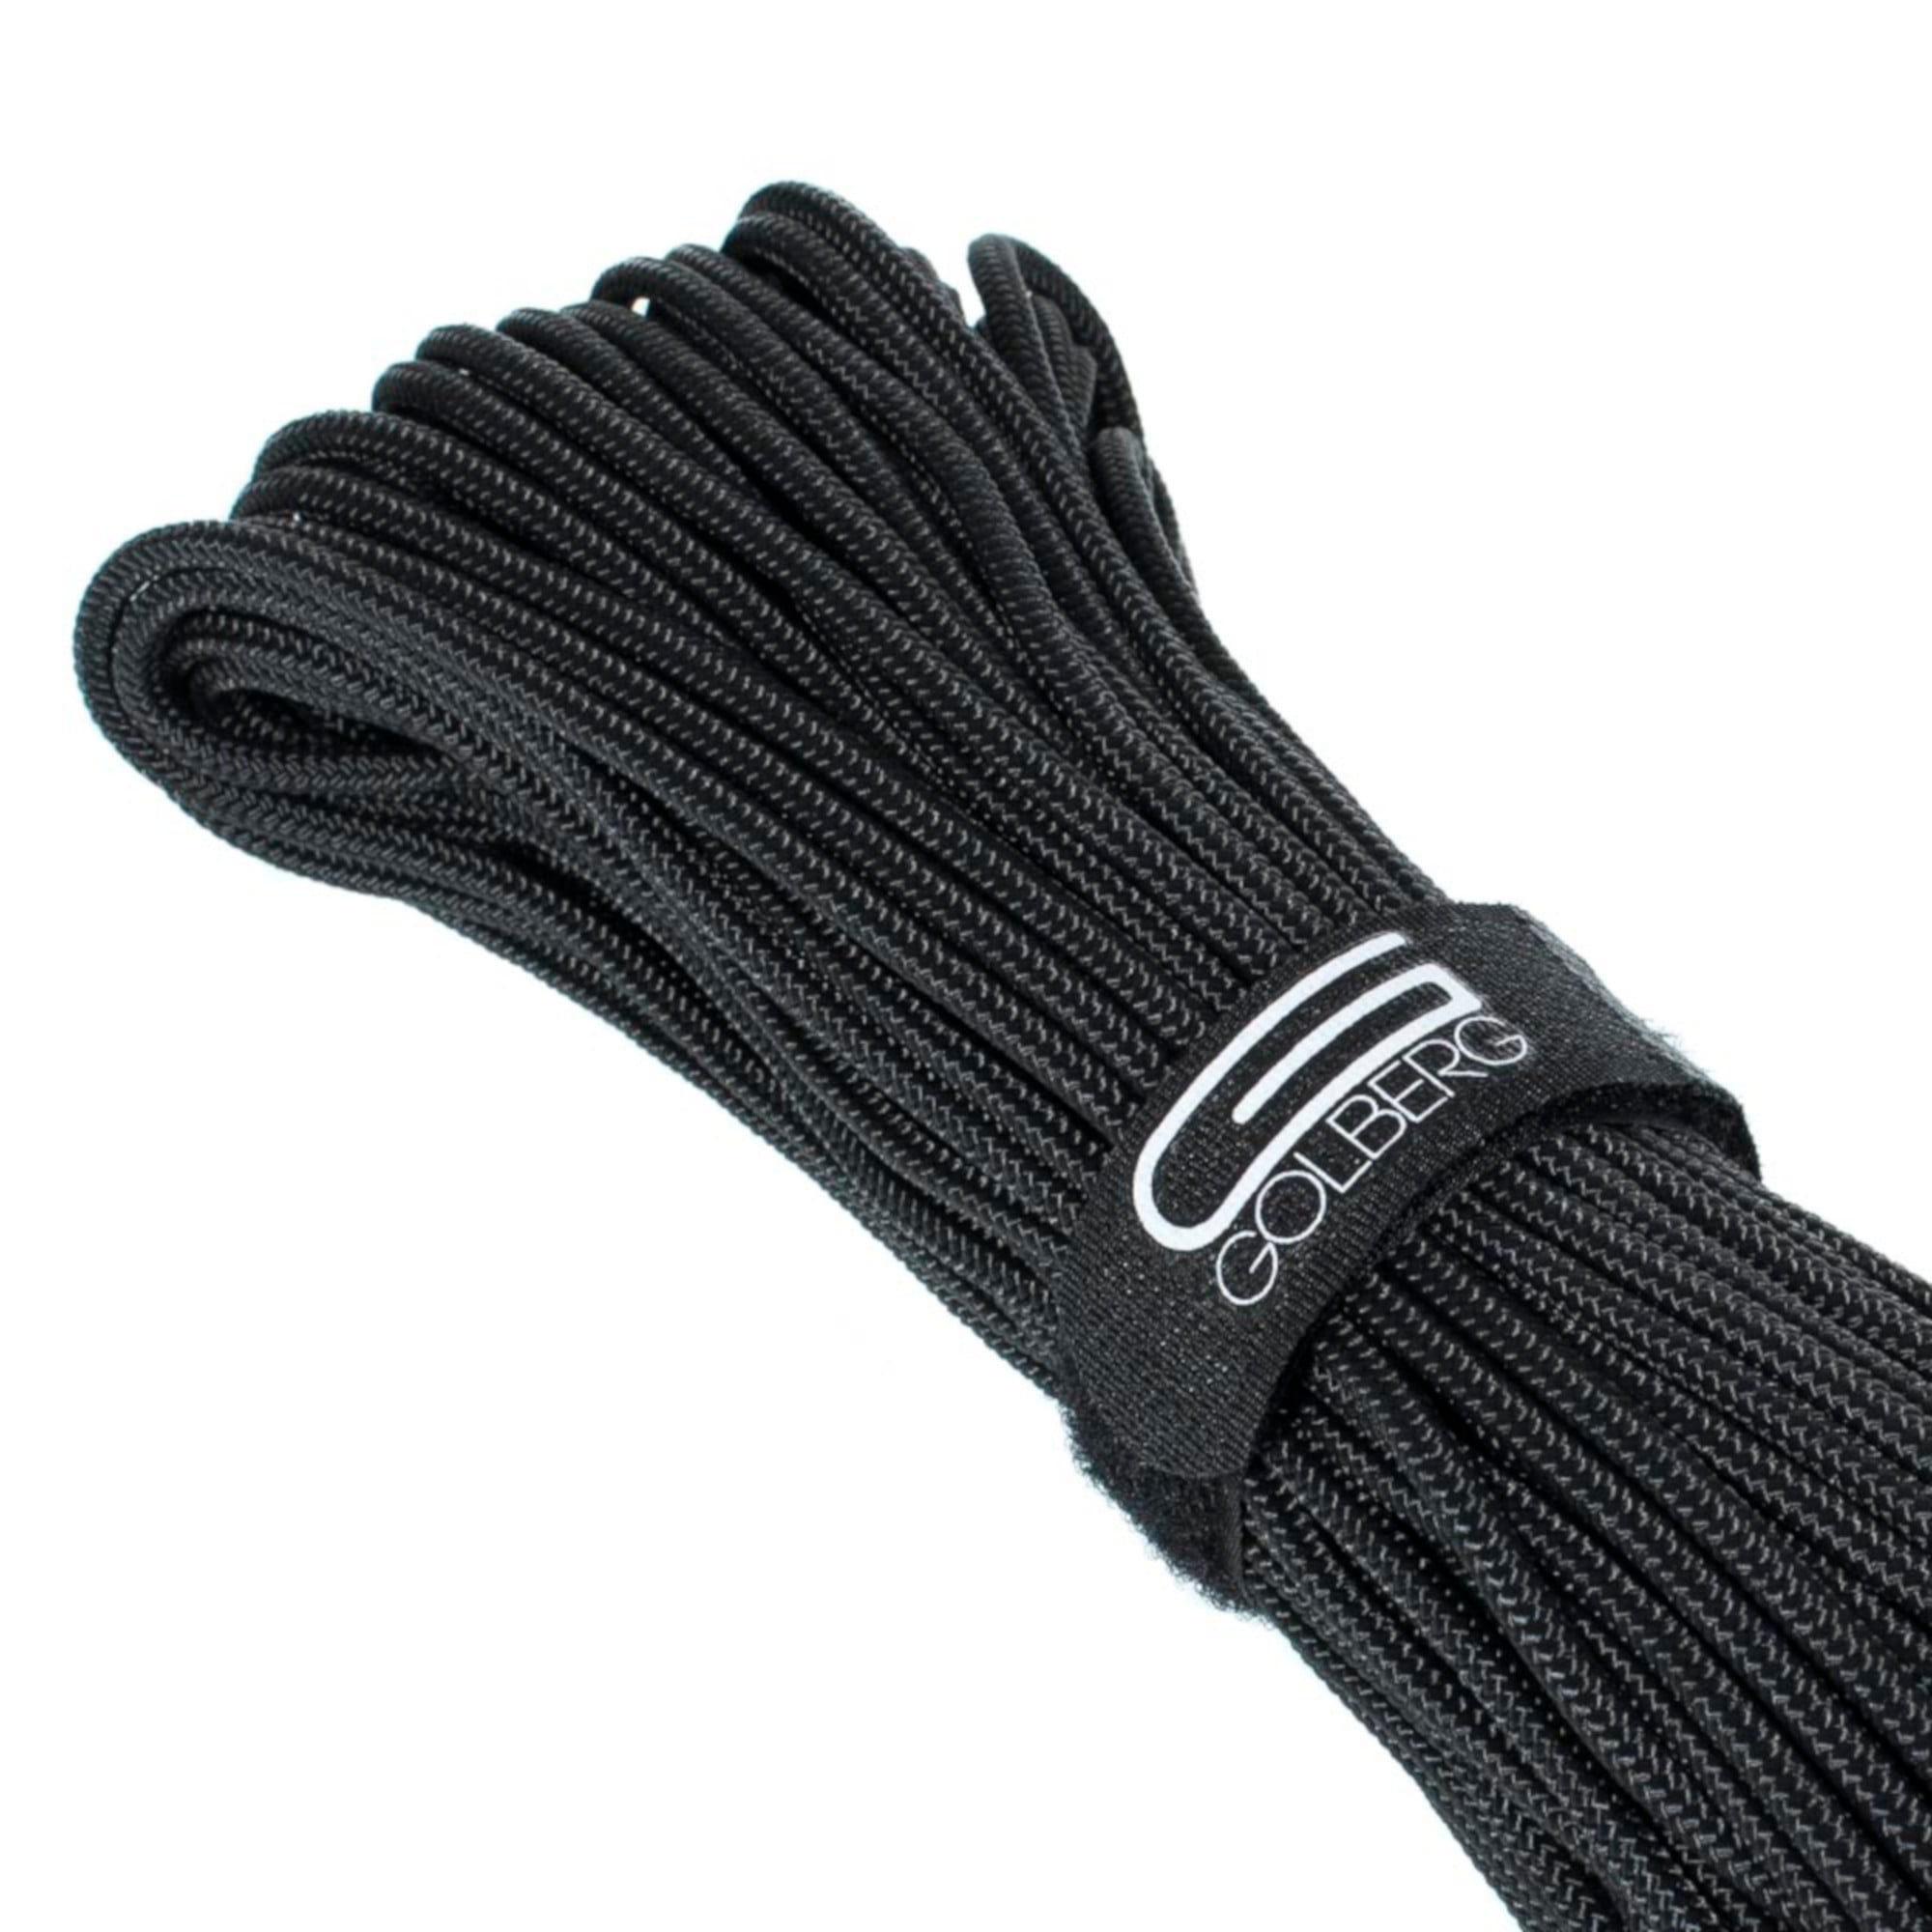 50 or 6mm – Lengths of 25 and 1000 Feet – Compact and Lightweight Cord Golberg Premium Polyester Accessory Cord – USA Made Smooth Braid Minimal Stretch Rope – Sizes of 3mm 4mm 100 5mm 250 